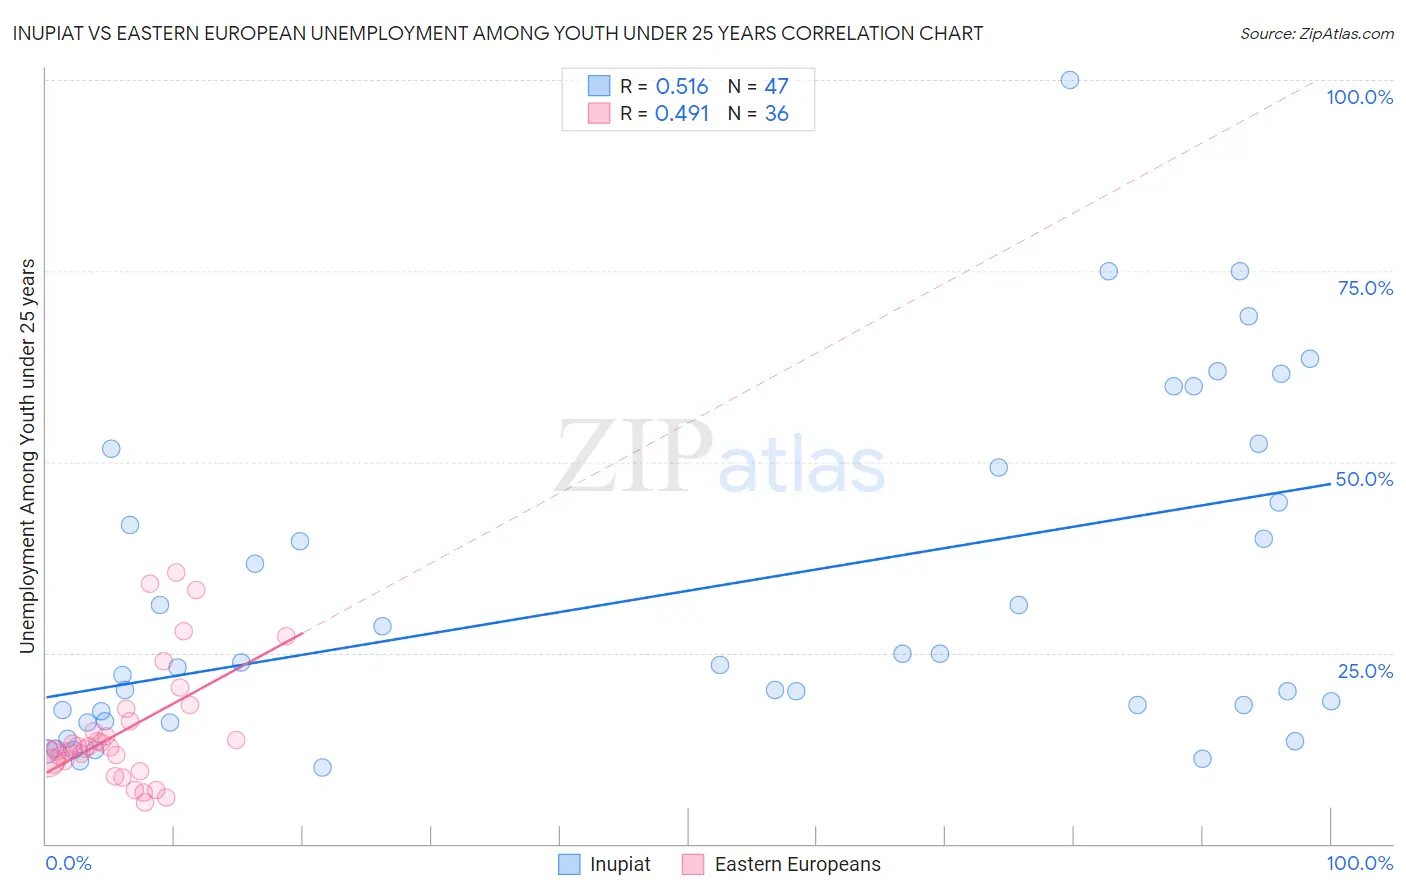 Inupiat vs Eastern European Unemployment Among Youth under 25 years